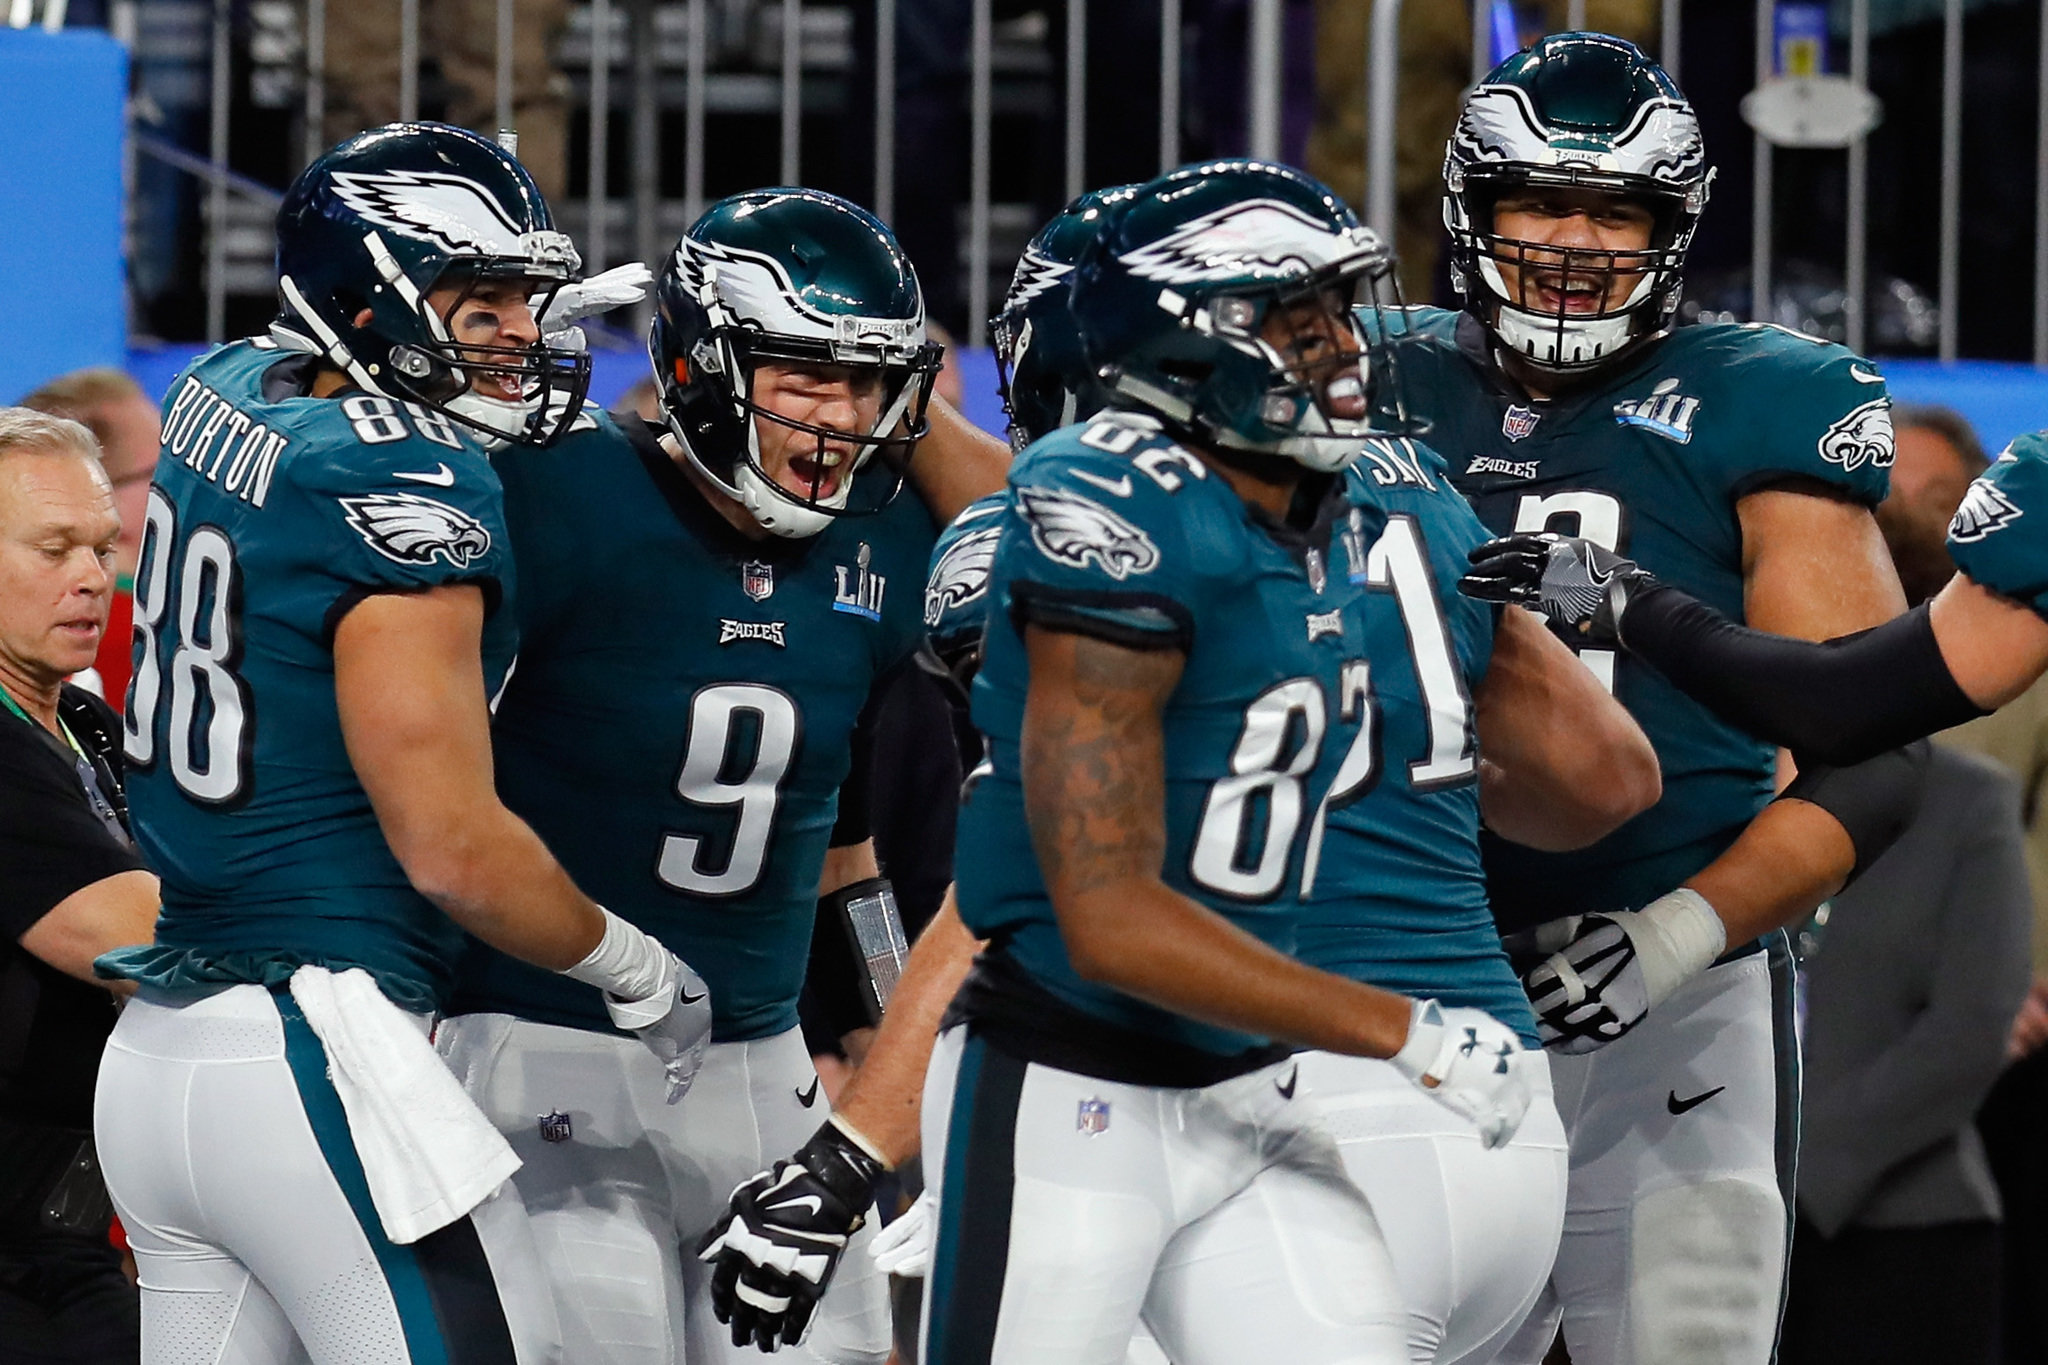 Nick Foles, Corey Clement power Eagles to Super Bowl victory 41-33 over New England Patriots | Studs and Duds